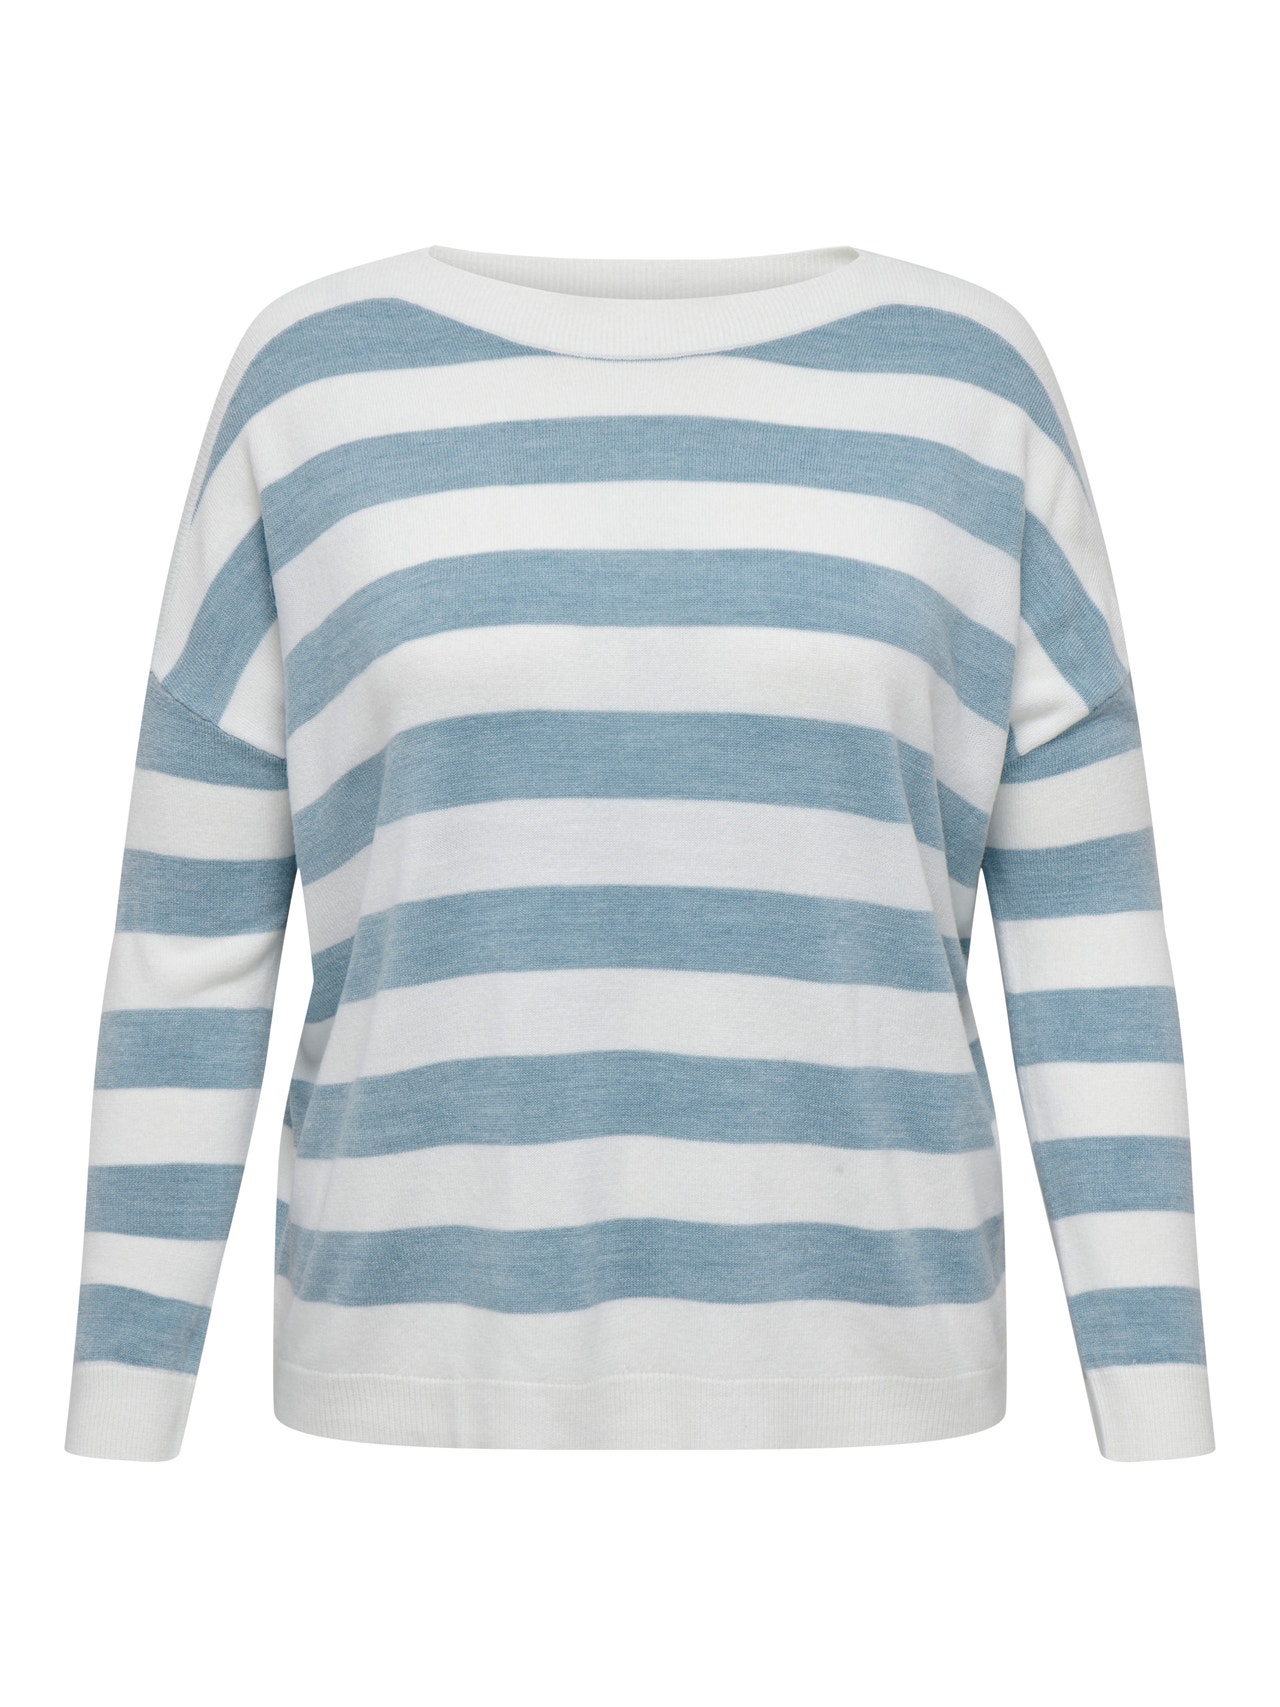 ONLY Curvy knitted pullover -Blue Blizzard - 15292796